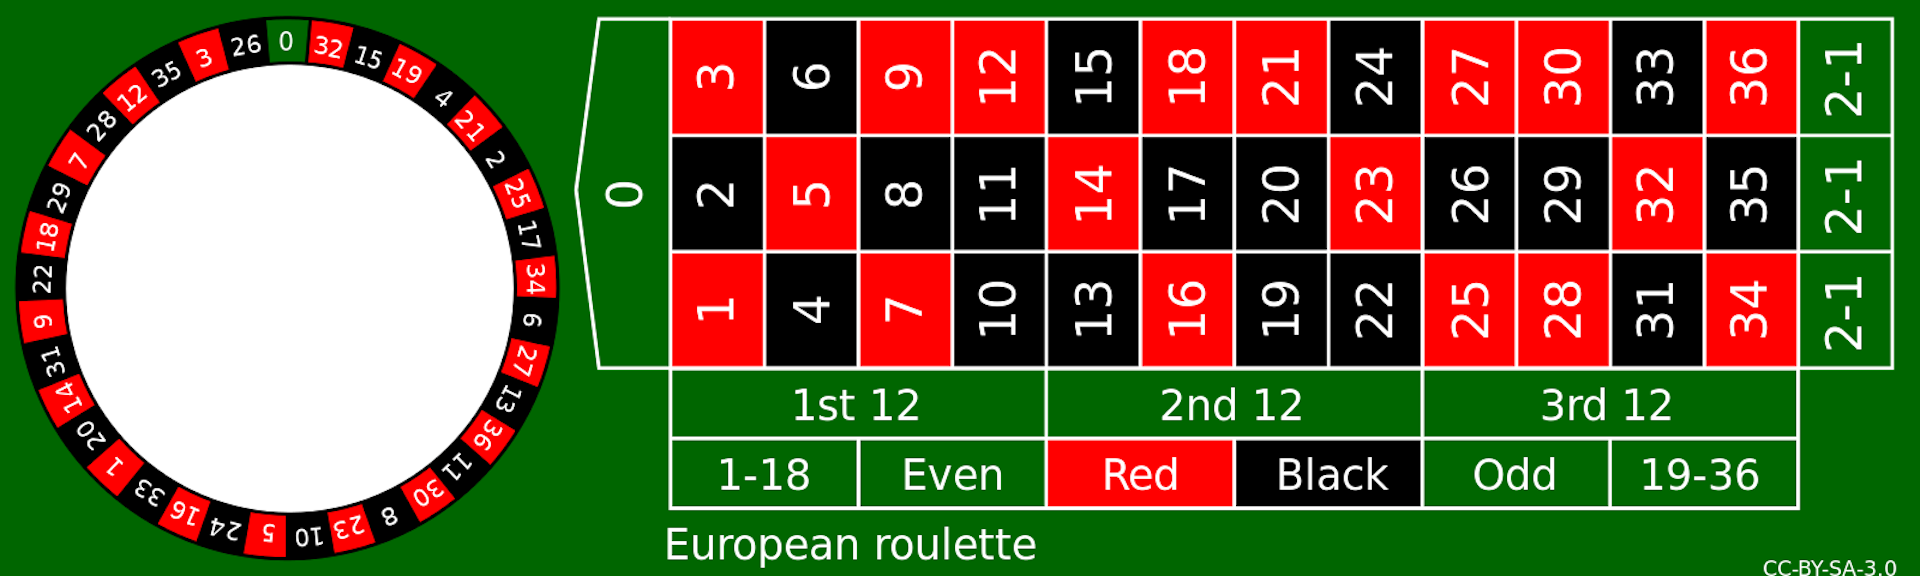 roulette wheel layout strategy